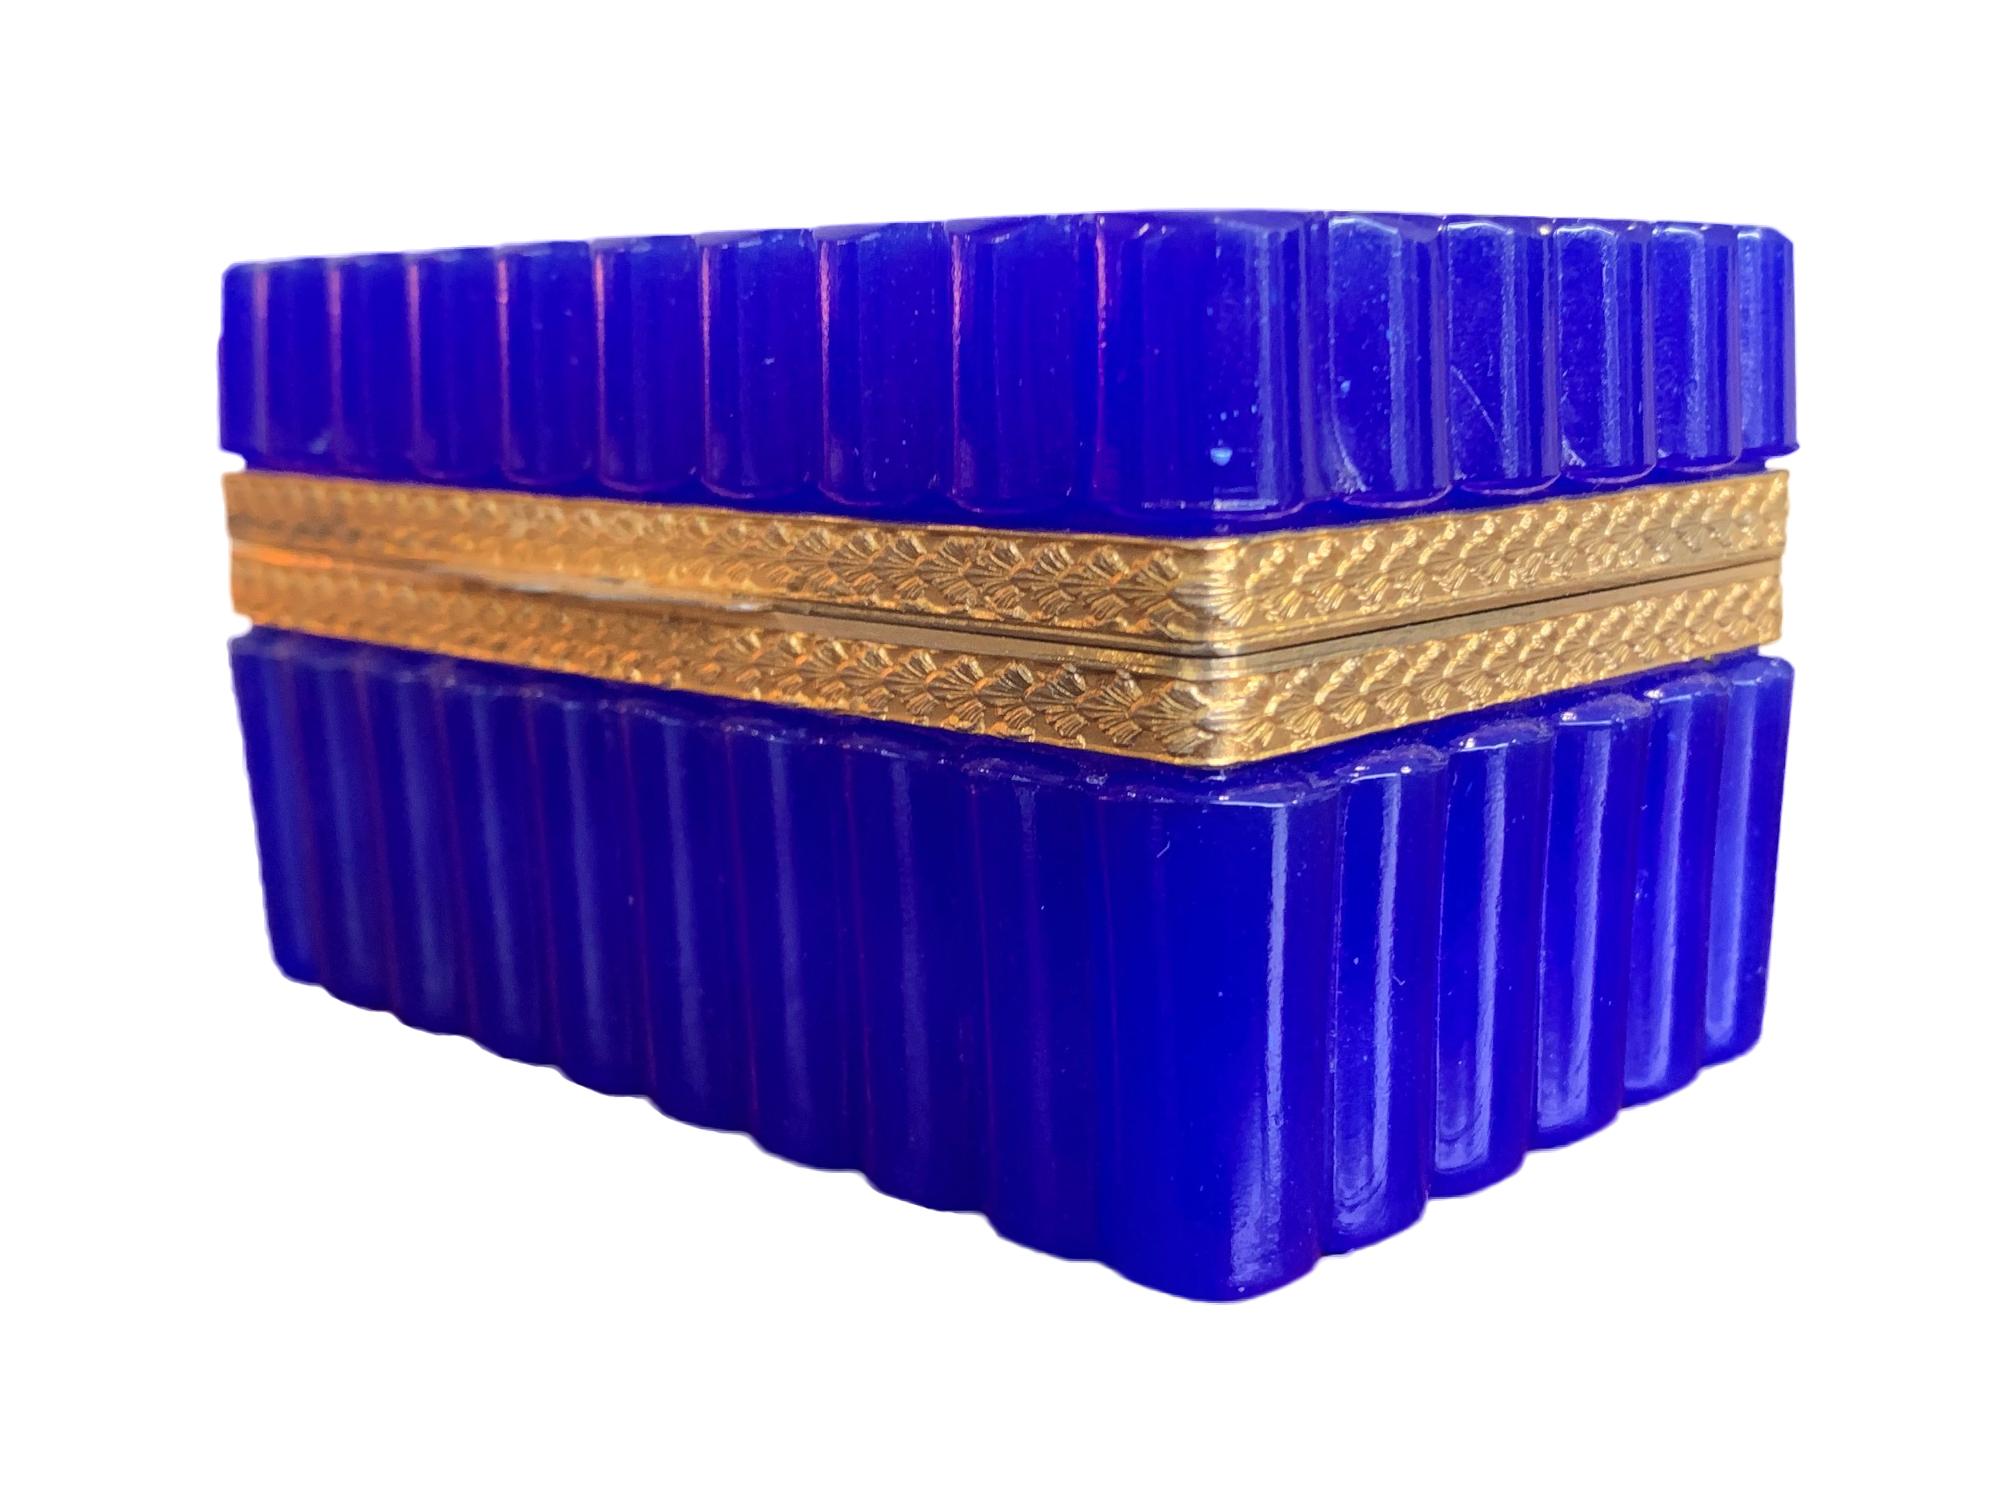 Gilt Stunning 1950s Cobalt Blue Murano Glass Hinged Jewelry Box by Cendese, Italy